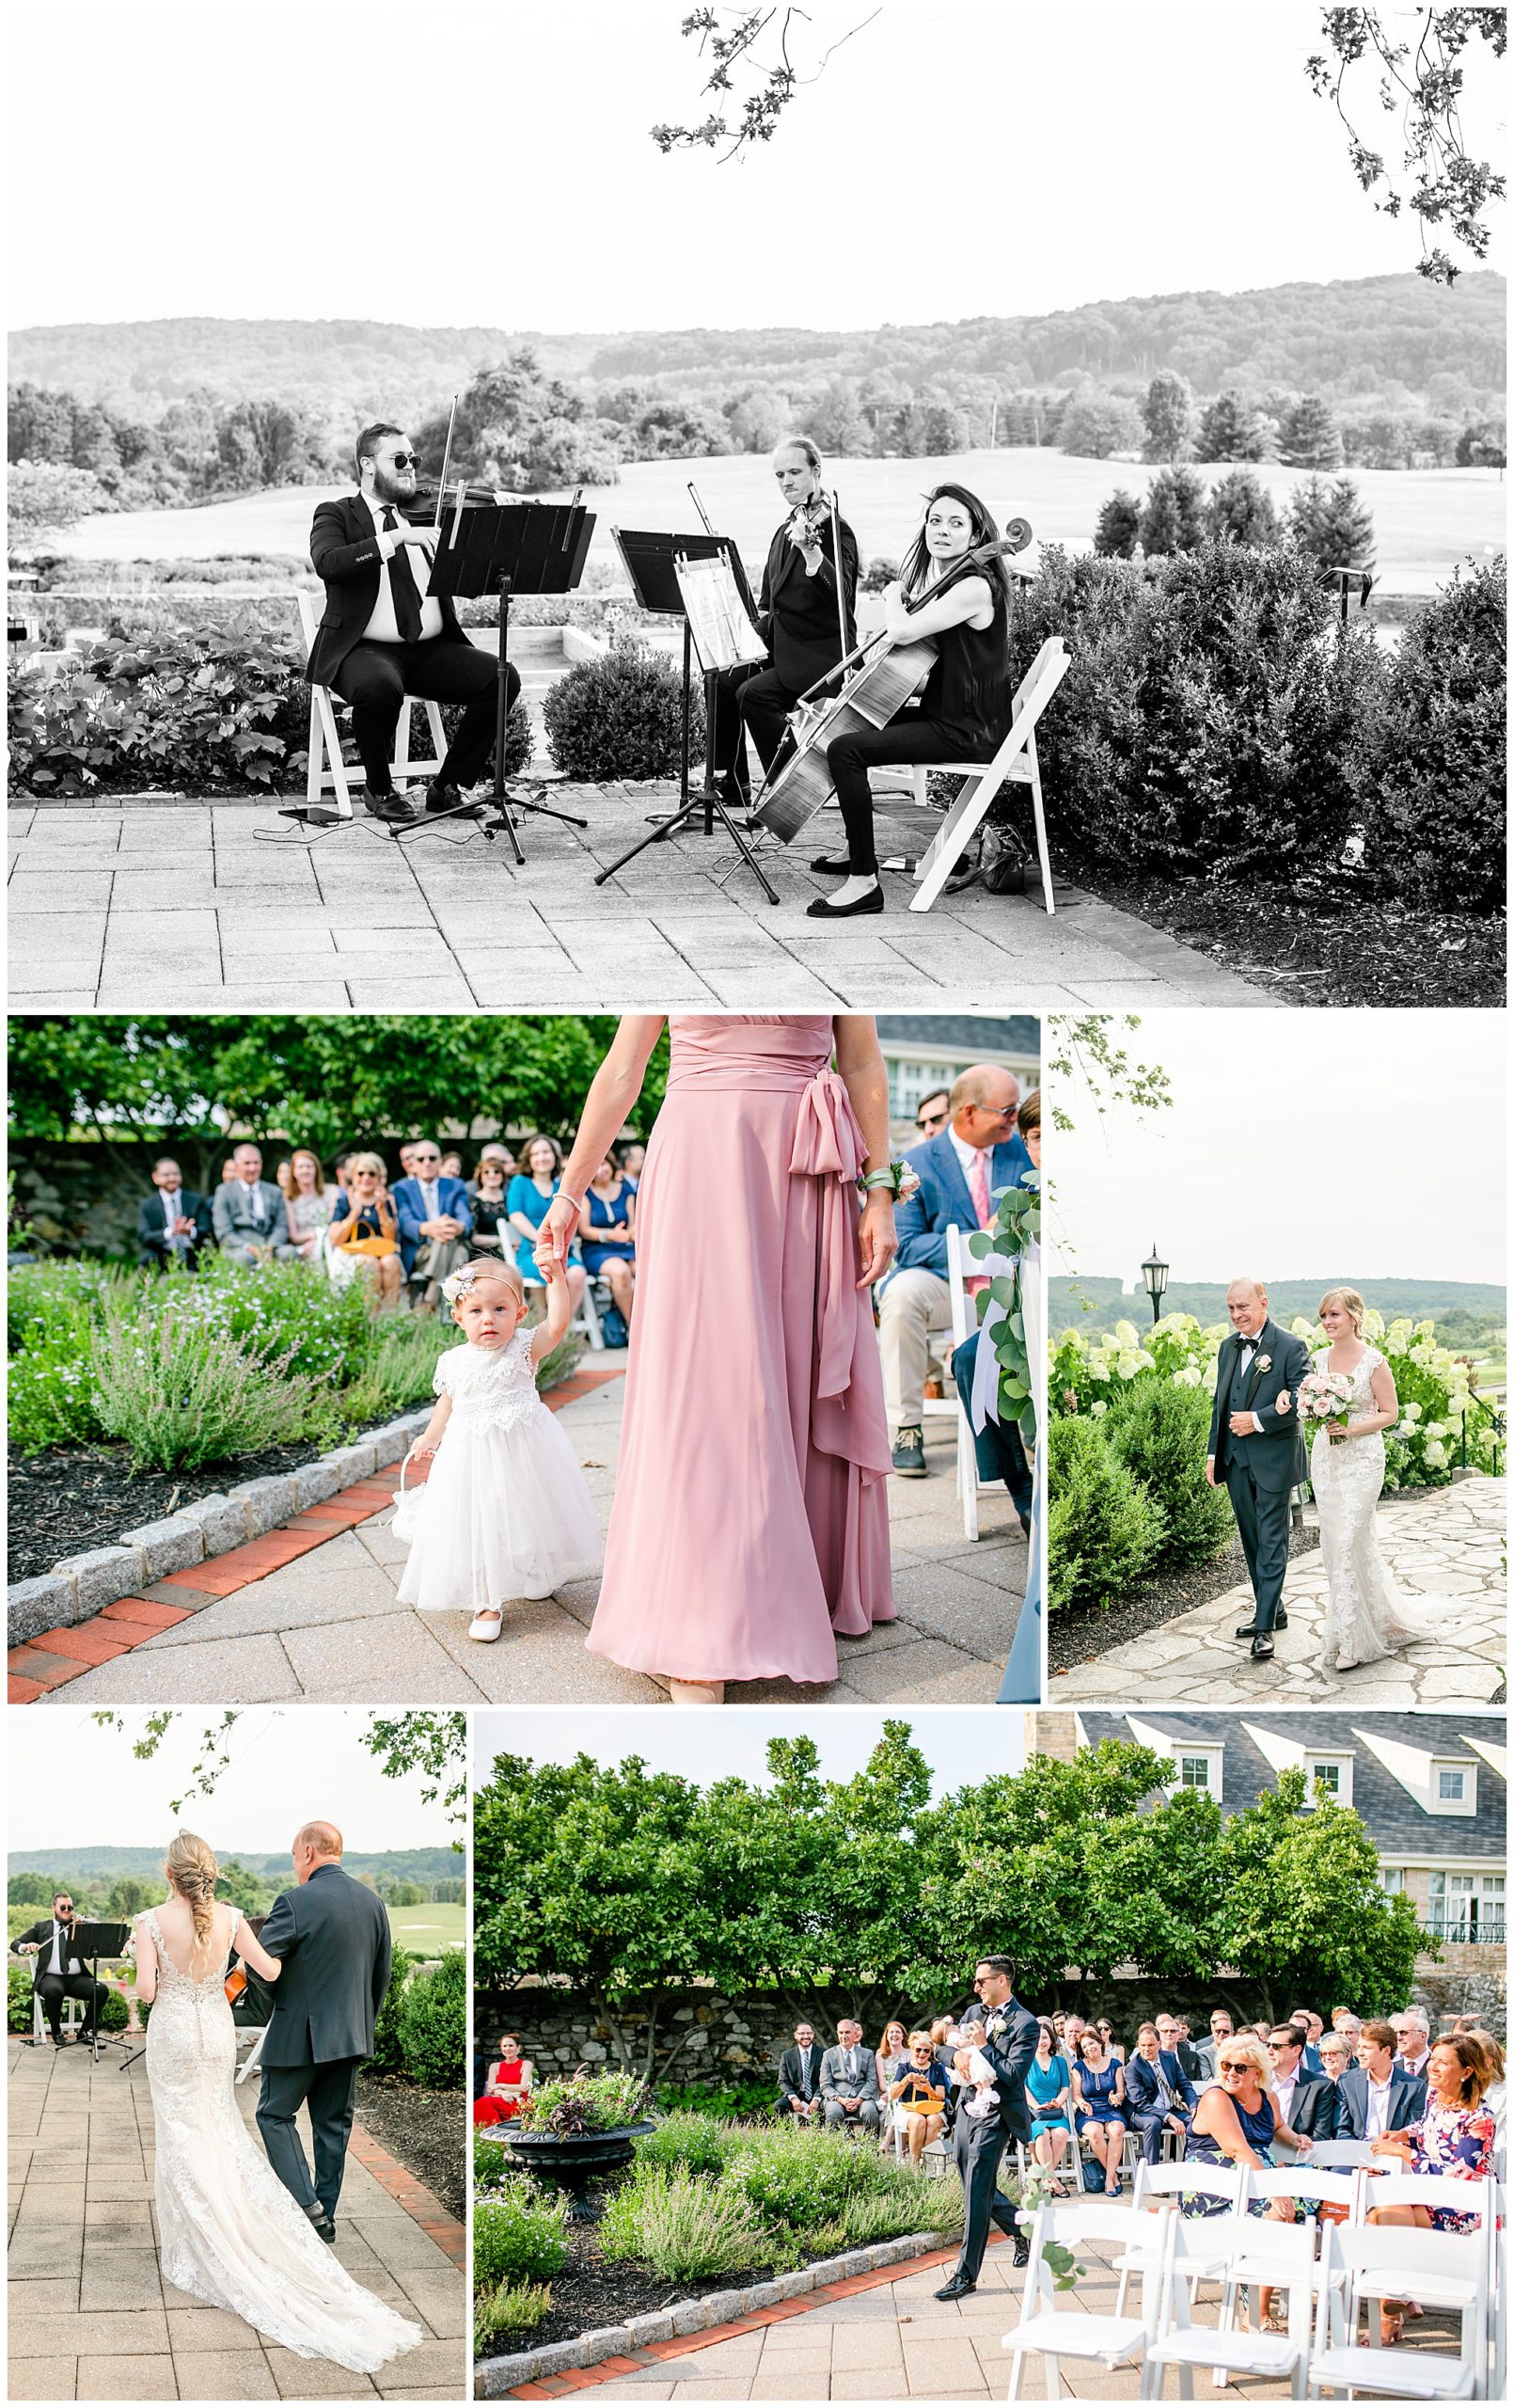 mid-summer Hayfields Country Club, Hunt Valley wedding, Baltimore wedding photographer, Rachel E.H. Photography, DC wedding photographer, summer wedding, pink and navy aesthetic, Washington DC wedding photography, Baltimore wedding photography, wedding processional, string trio